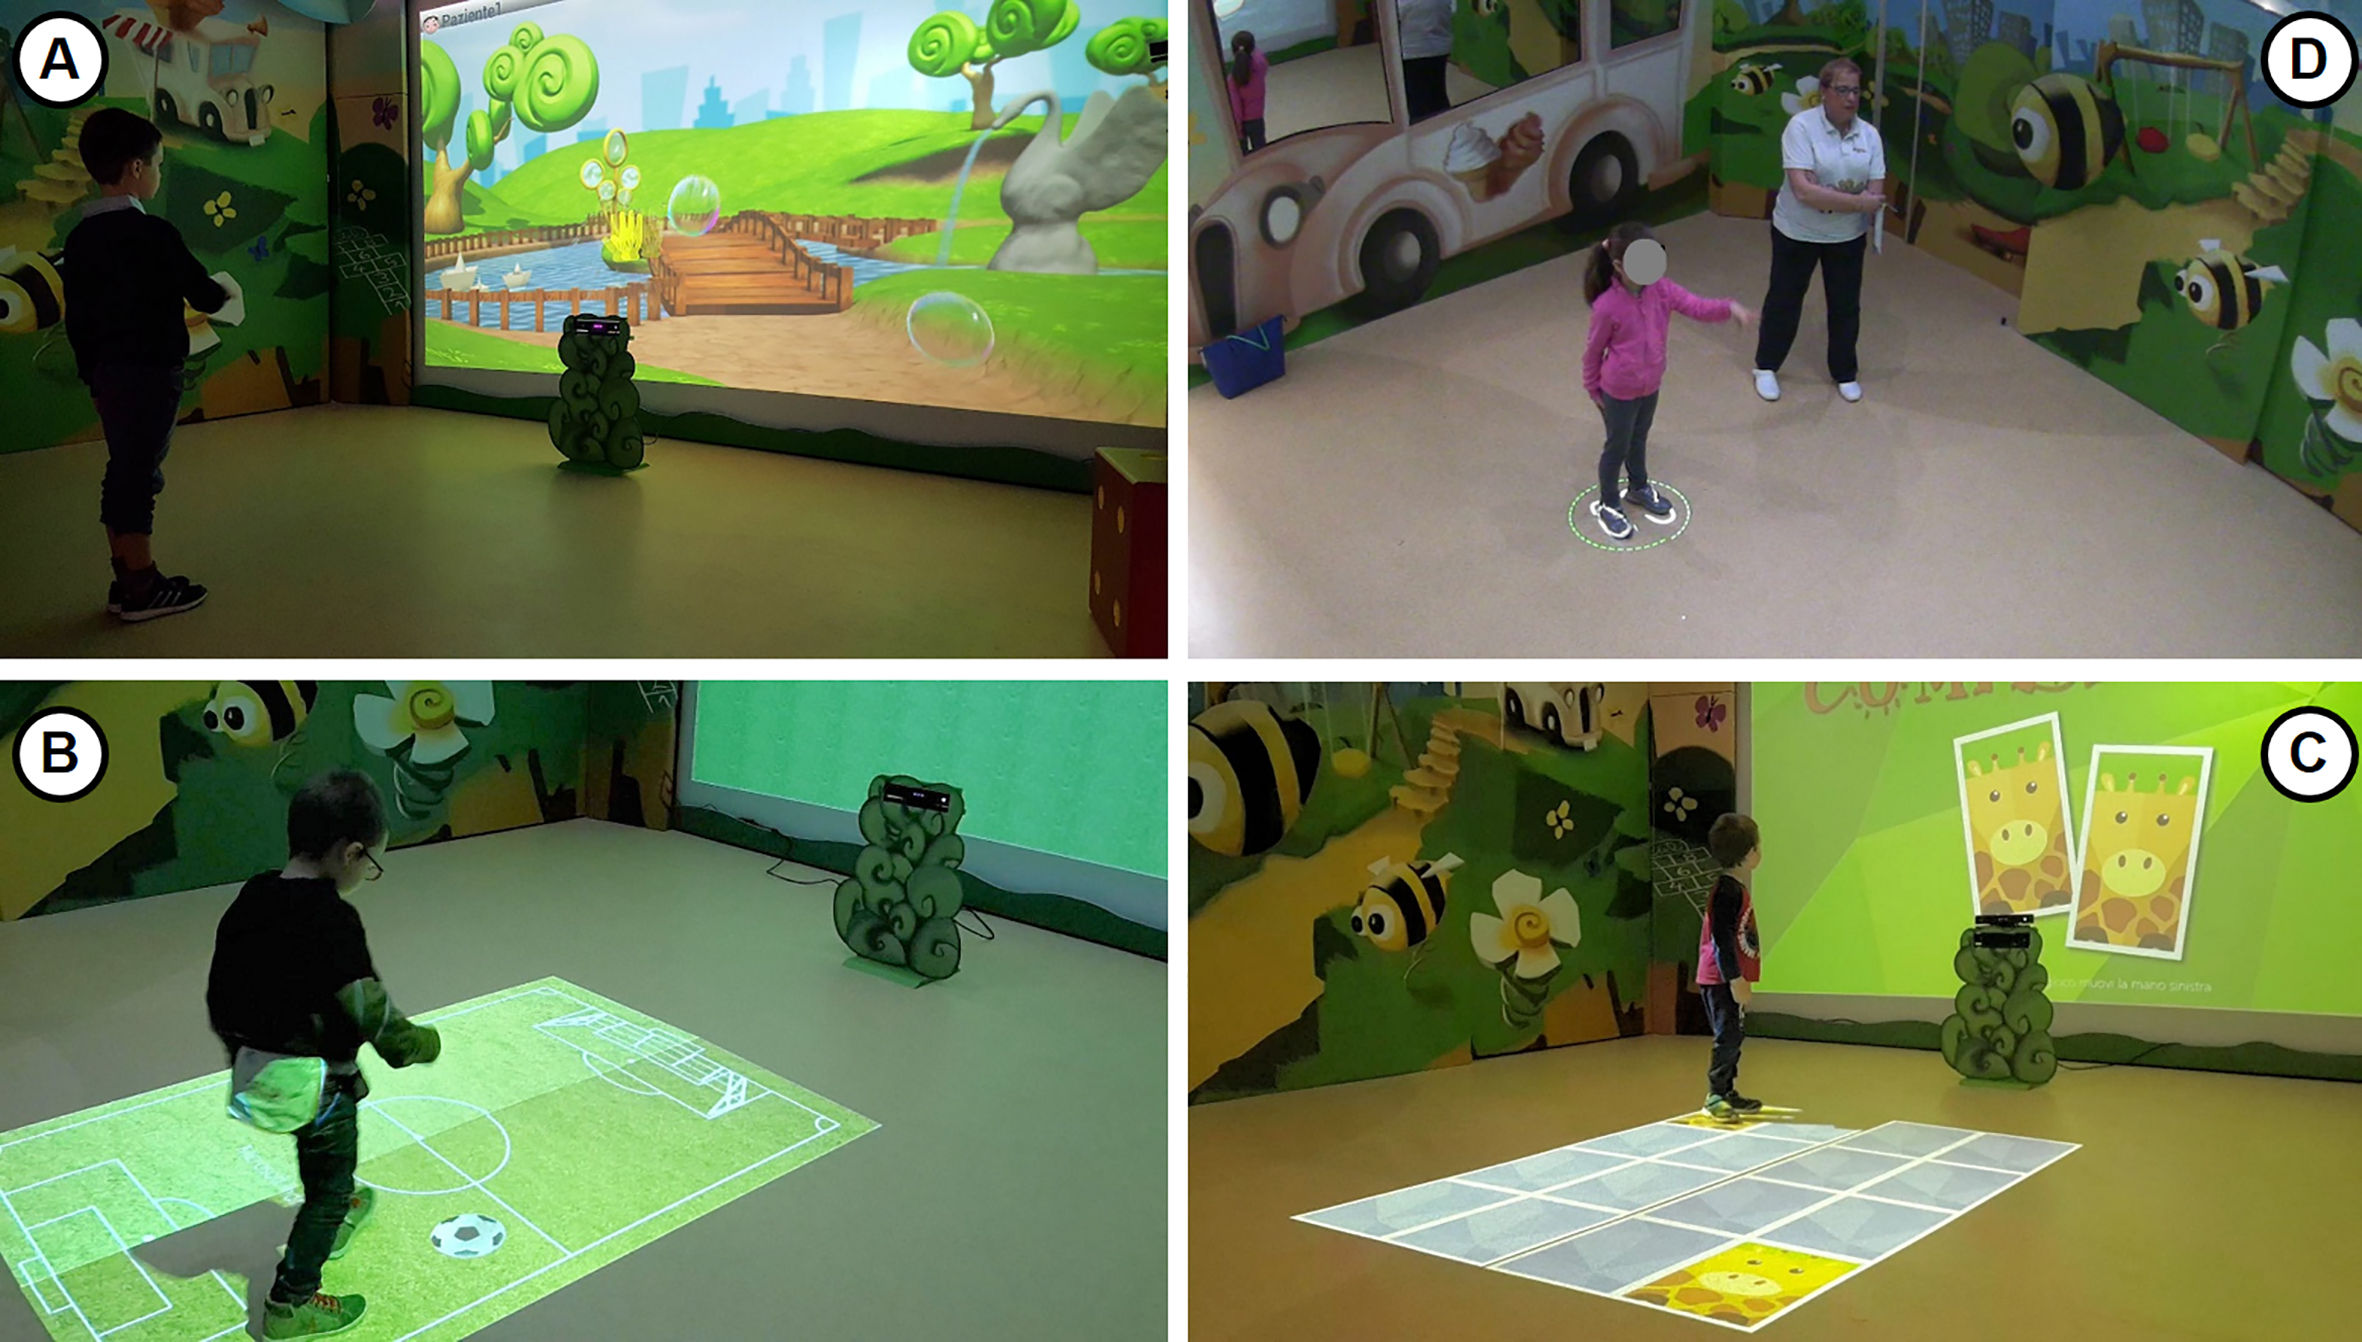 The hi-tech room in use: (a) a game being played using VITAMIN software, with the images projected onto the frontal screen; (b) a typical rehabilitation session; (c, d) other exercises performed using images projected onto the floor.